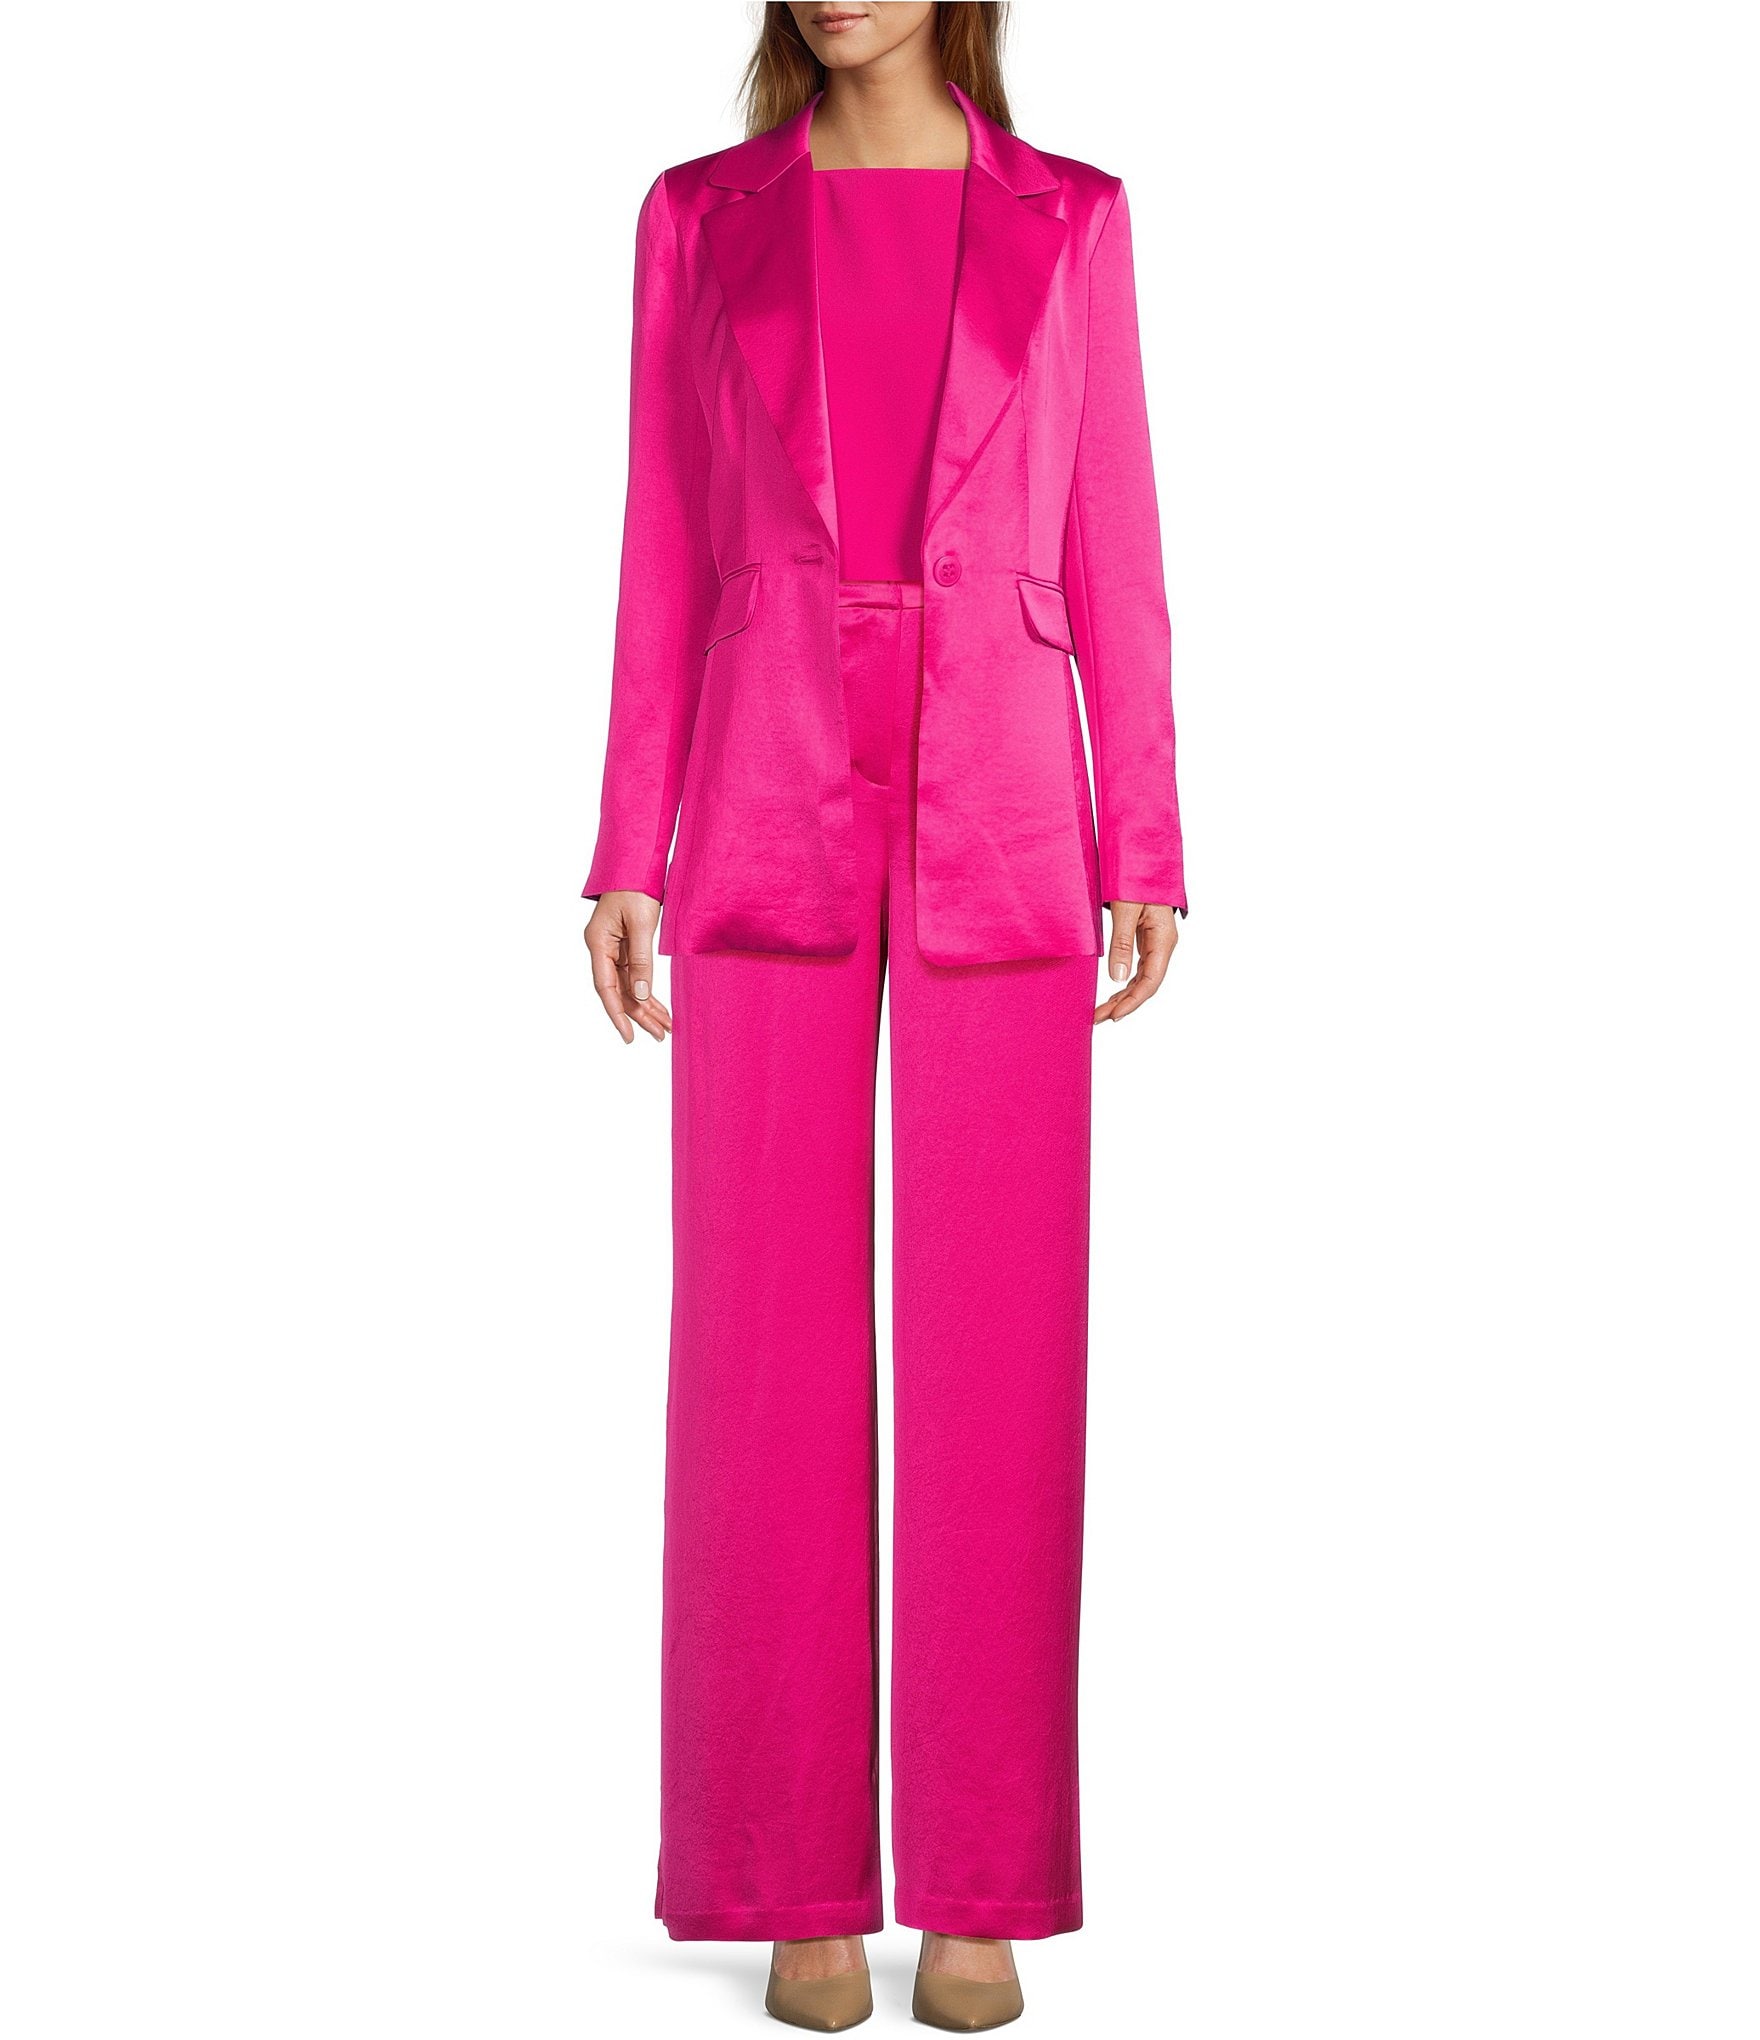 Hot Pink Bell Bottom Pants Suit Set With Blazer, Tall Women Pink Blazer Trouser  Suit, White Trouser Set for Women, Pants Suit Set Womens -  Finland